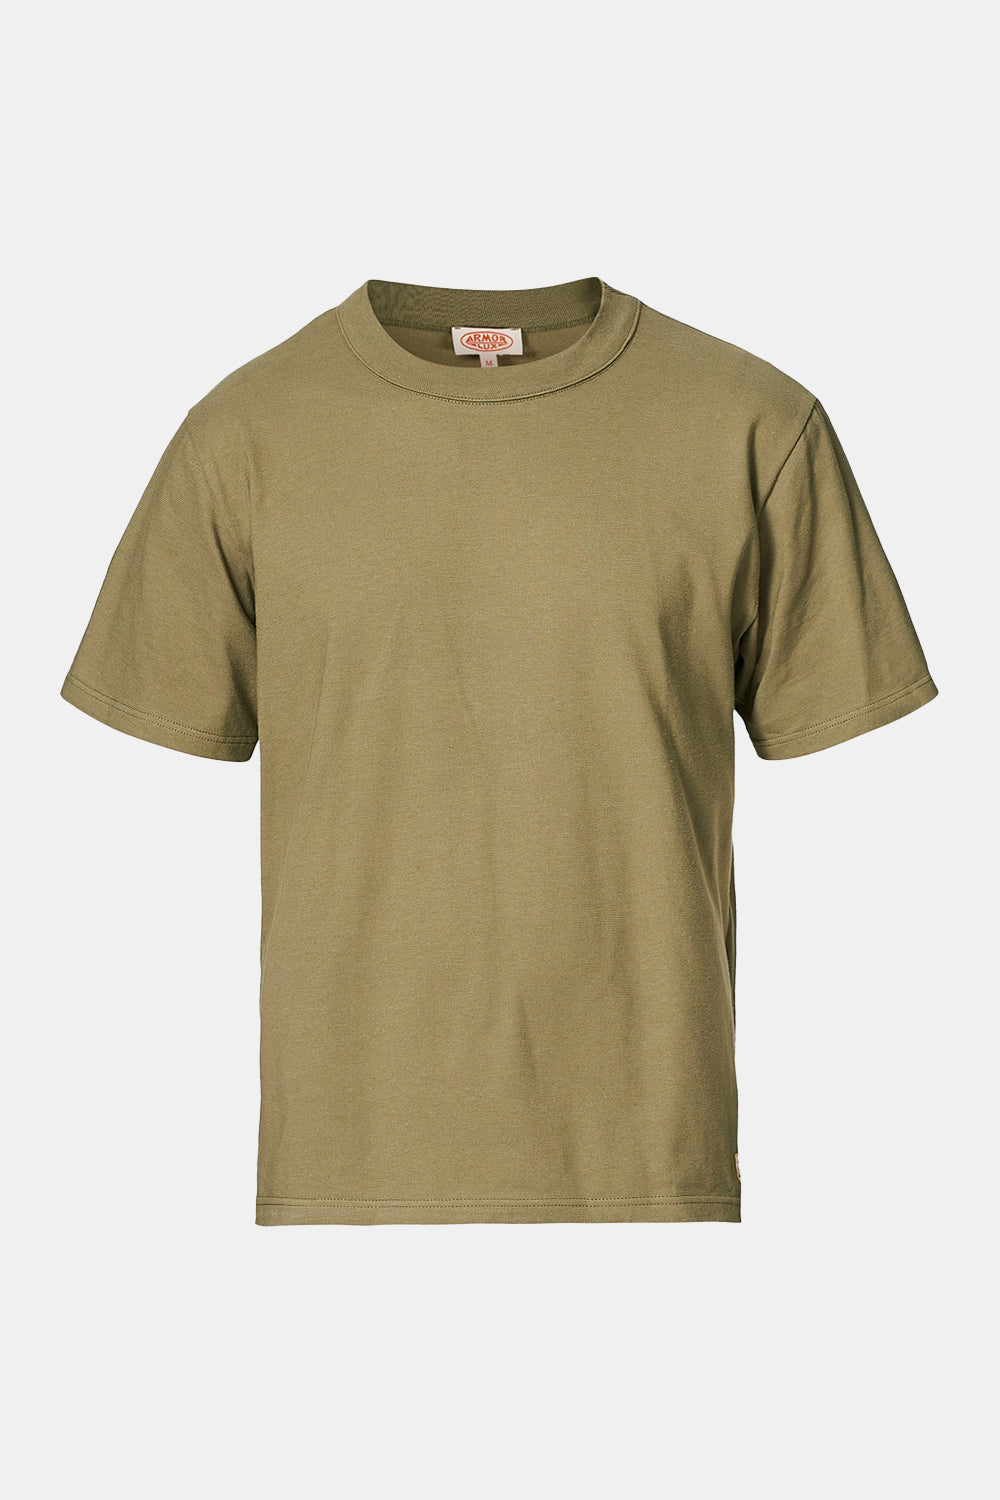 Armor Lux Heritage Organic Callac T-shirt (Olive)
